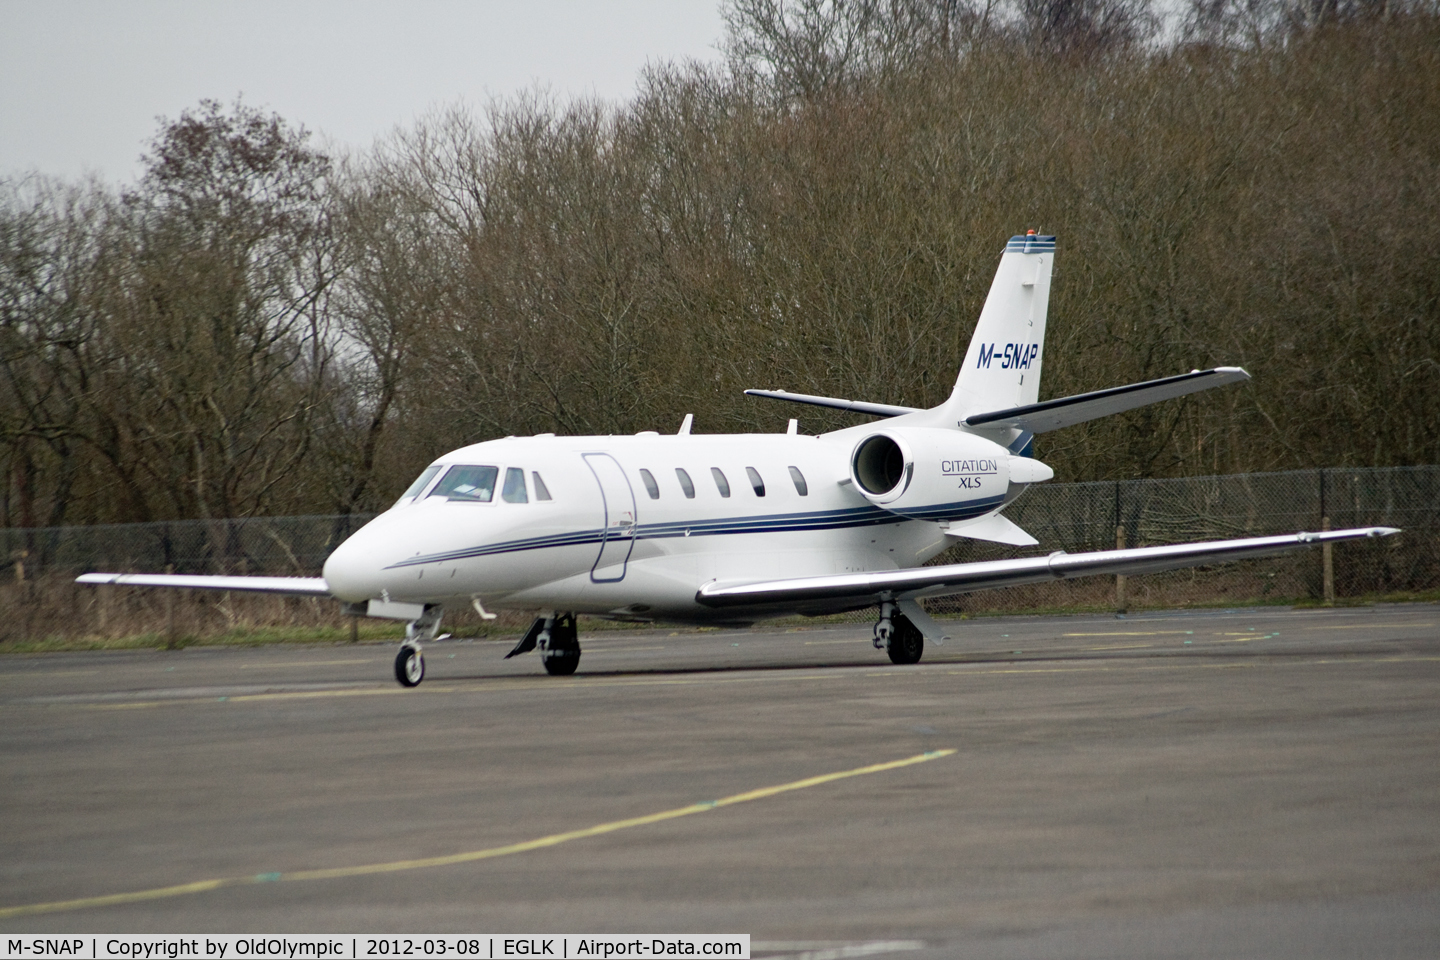 M-SNAP, 2008 Cessna 560XL Citation XLS C/N 560-5770, arriving for 10 minute turnround